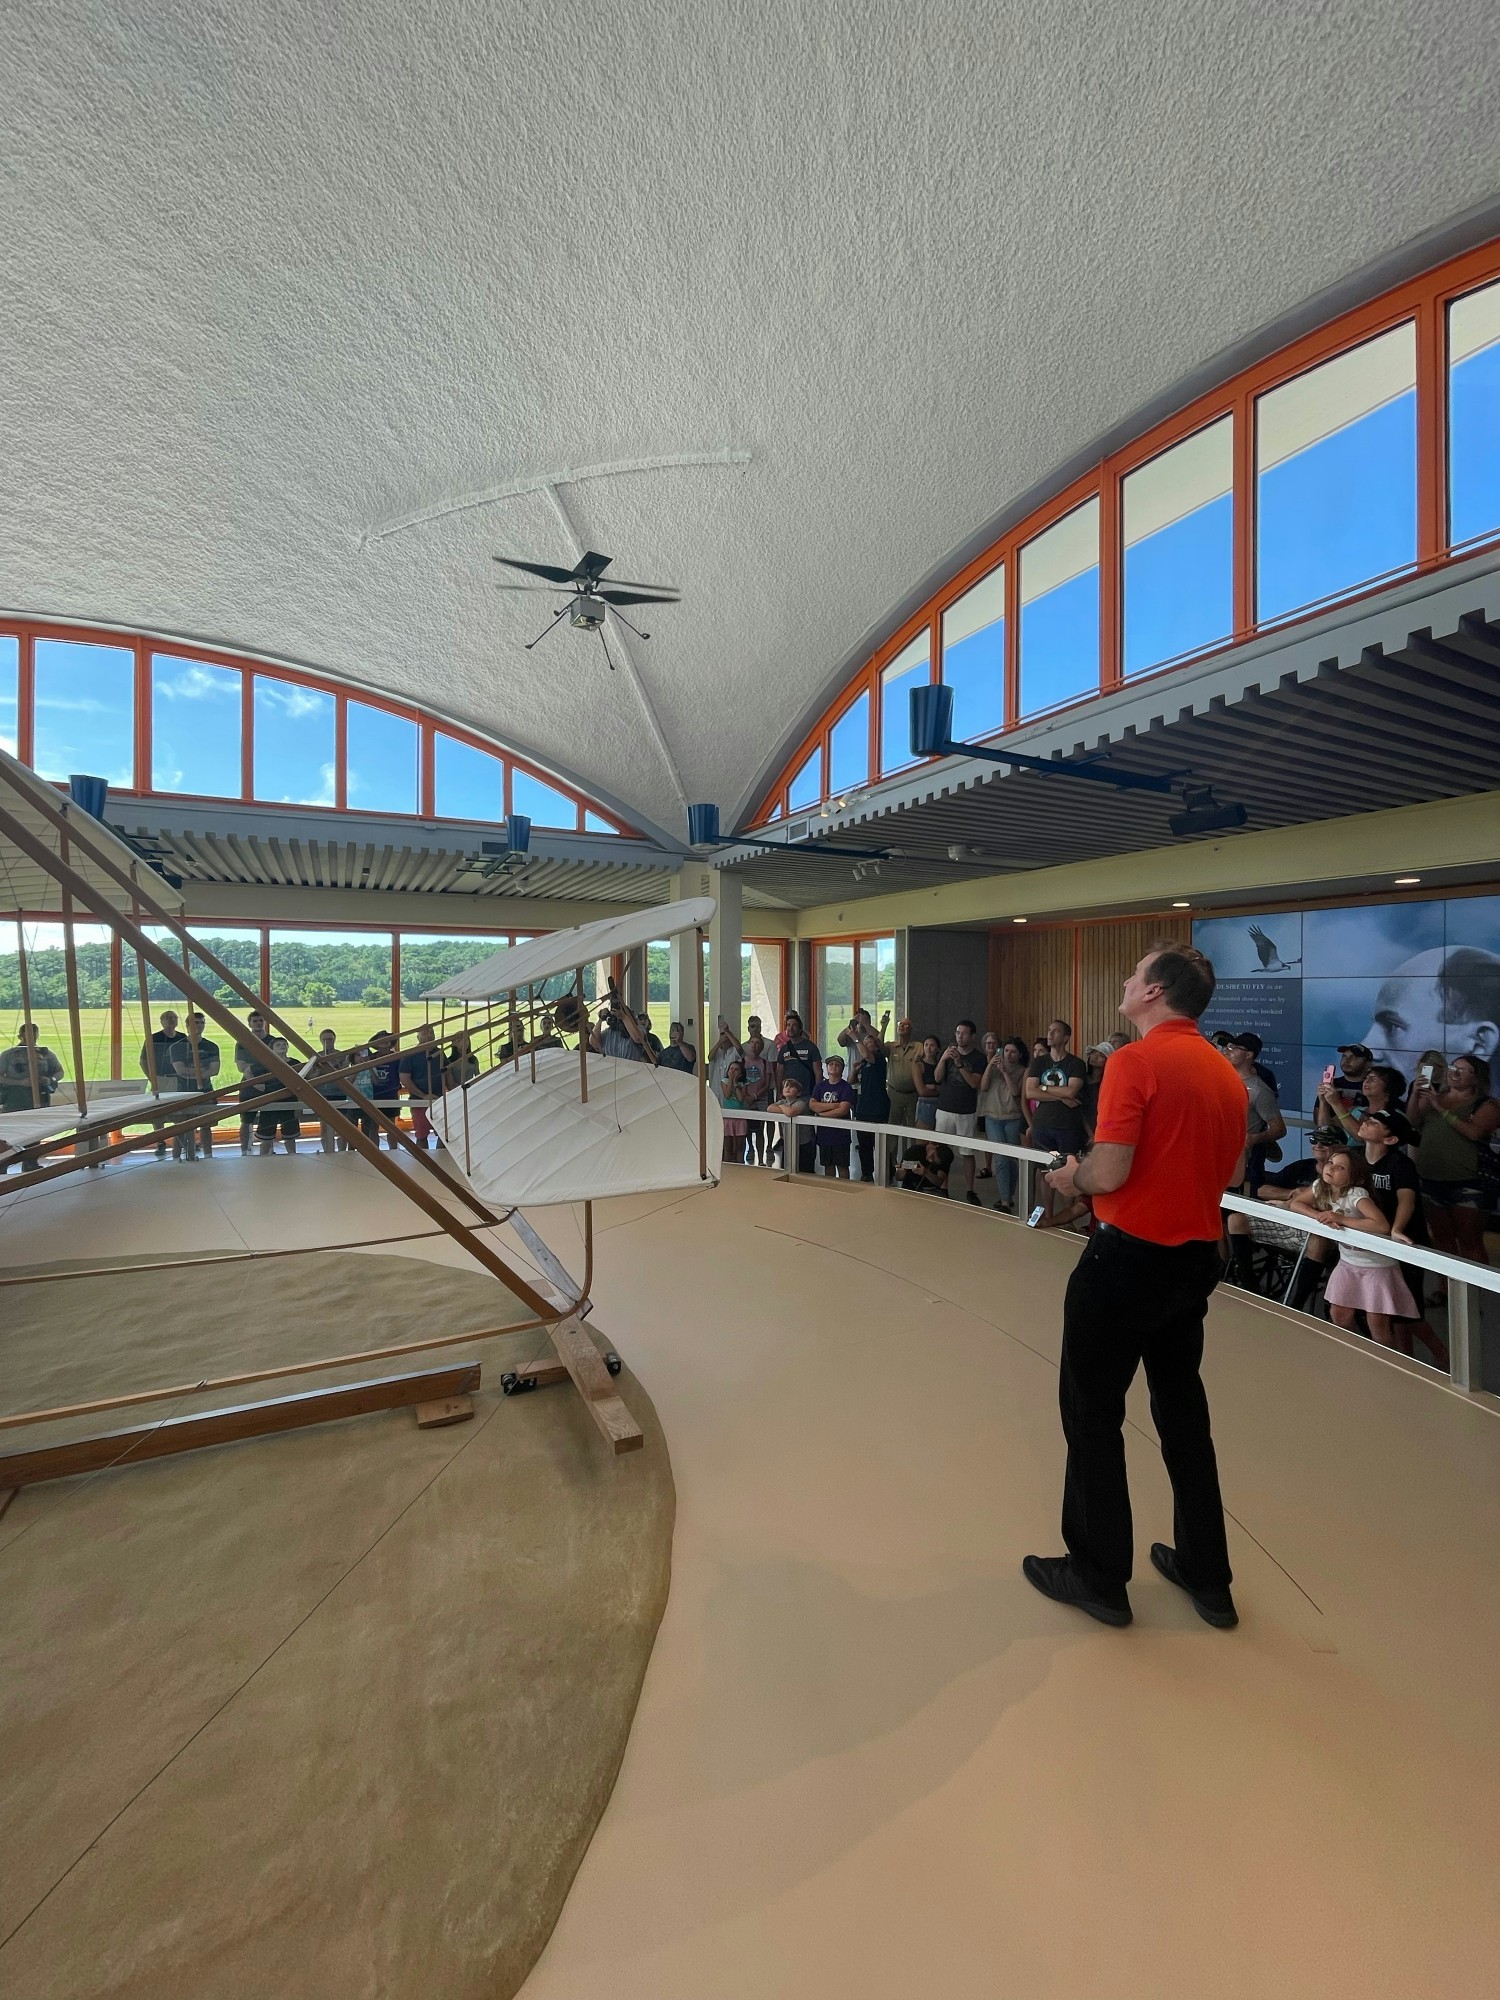 AV’s chief engineer, flying a model of the Ingenuity Mars Helicopter at the Wright Brothers National Memorial.